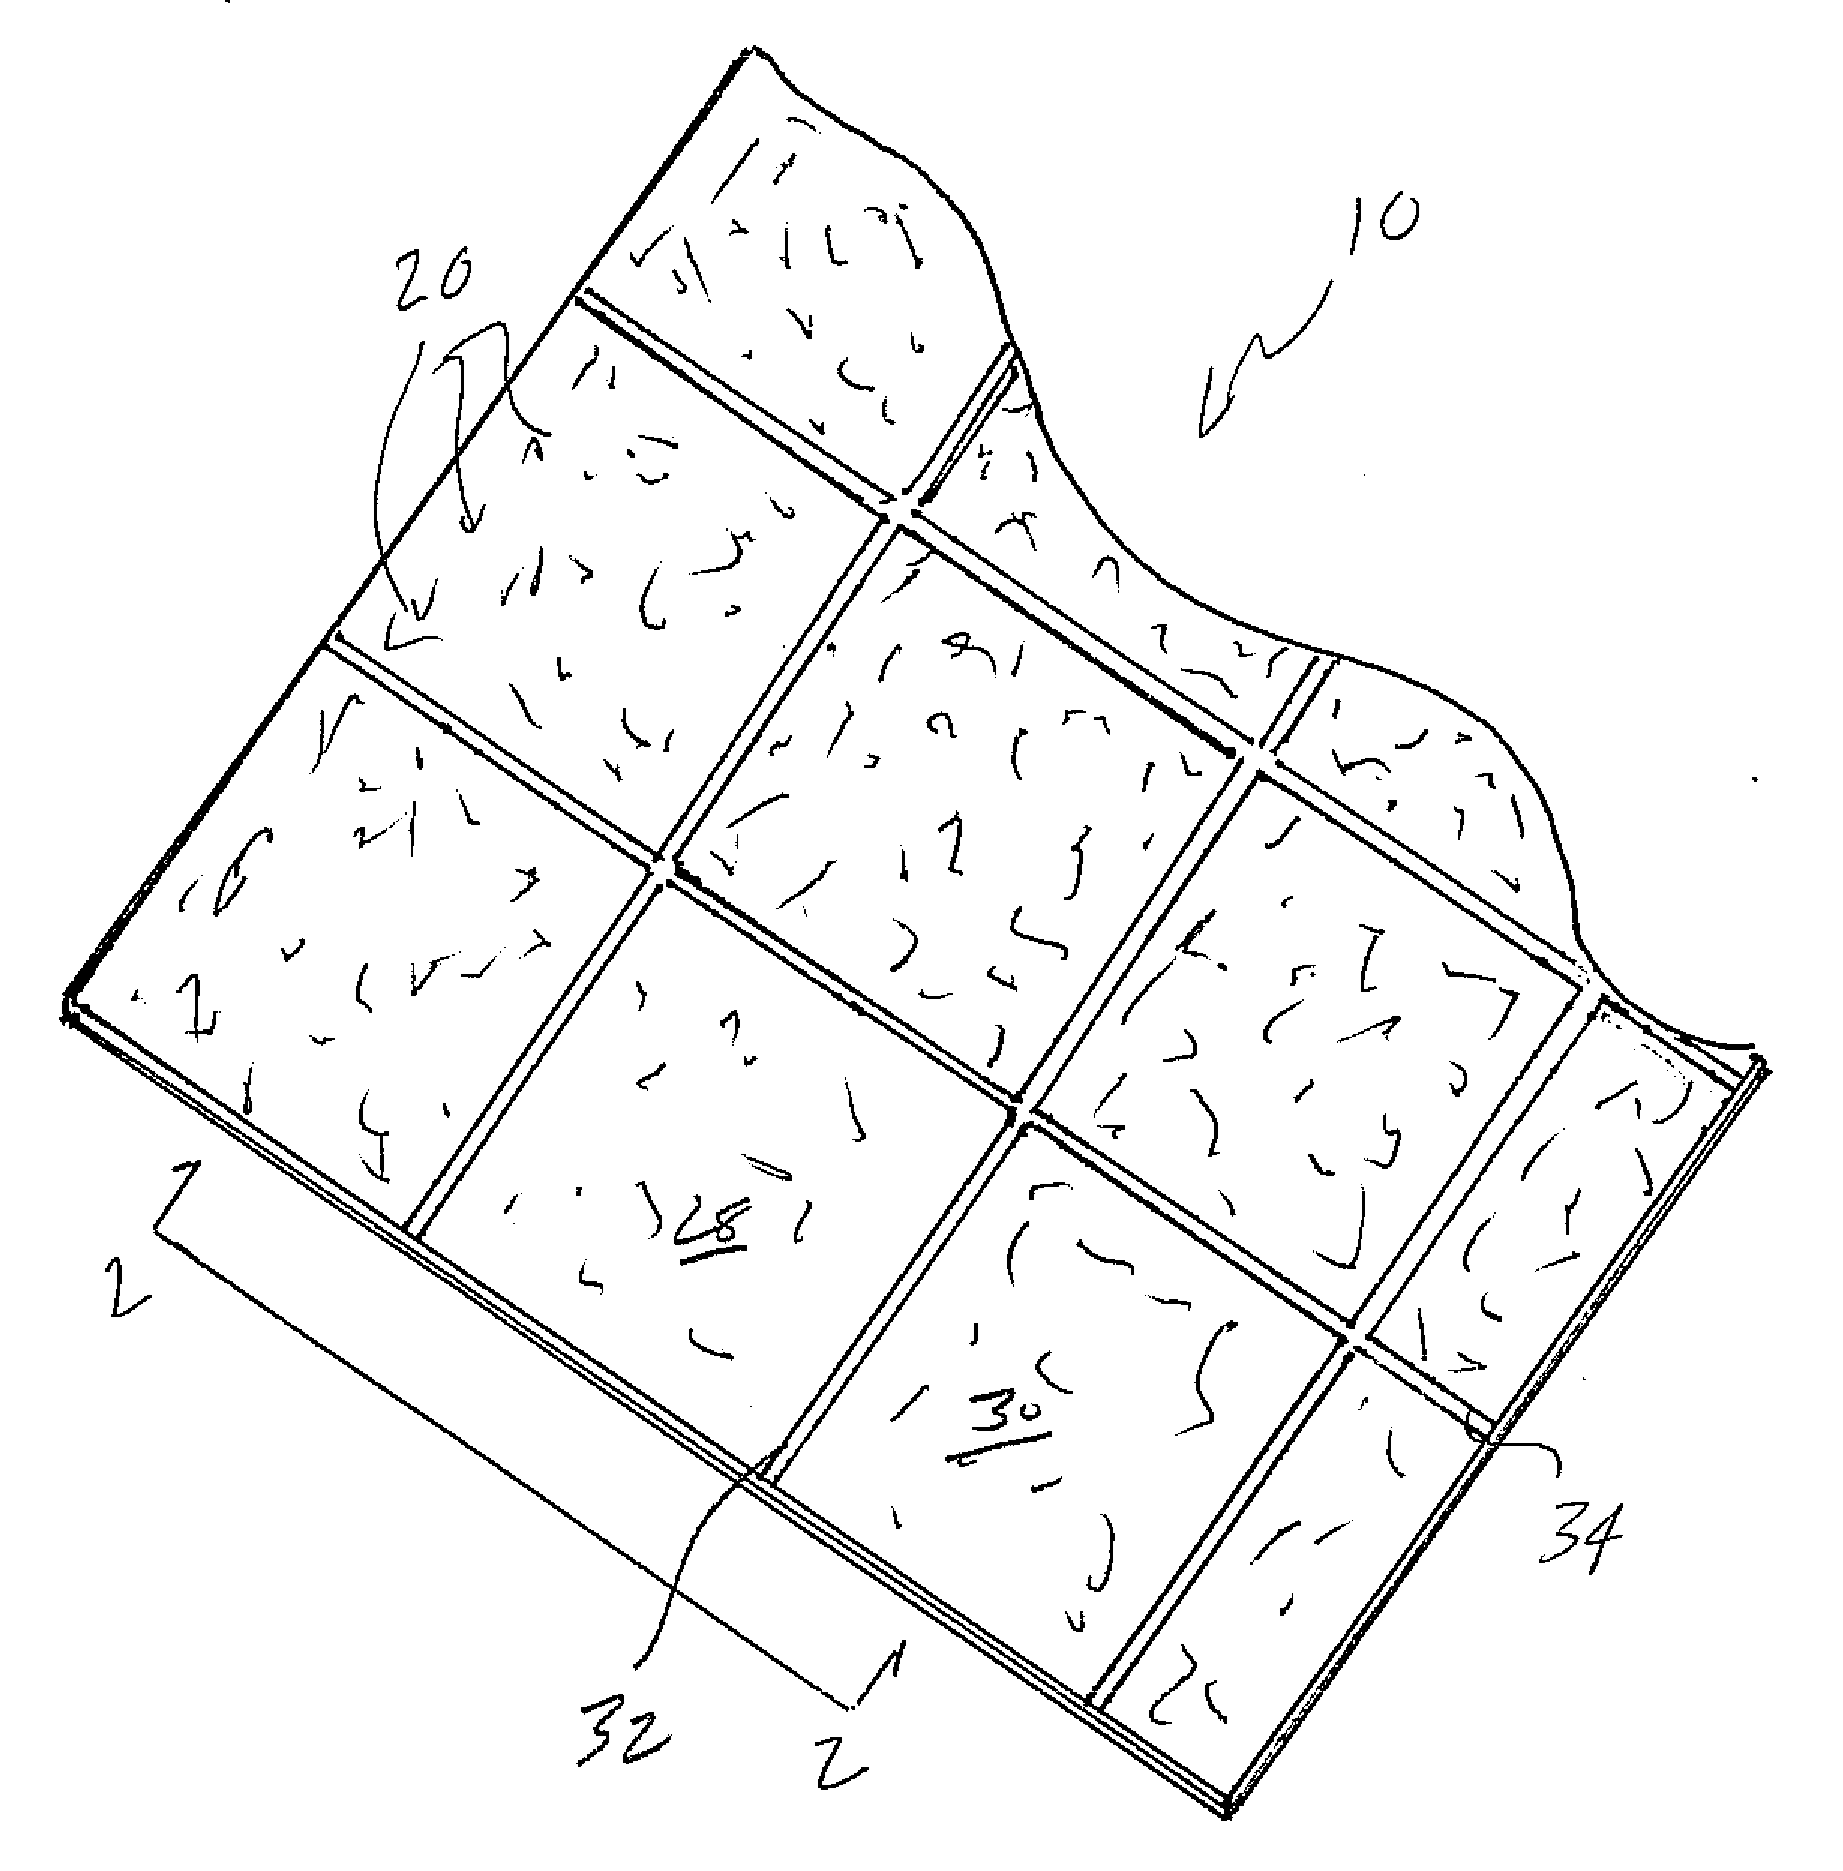 Plastic resin based composite tile board article and associated method for creating through routing and/or embossing of a substantially upper most layer thereof in order to create a decorative pattern